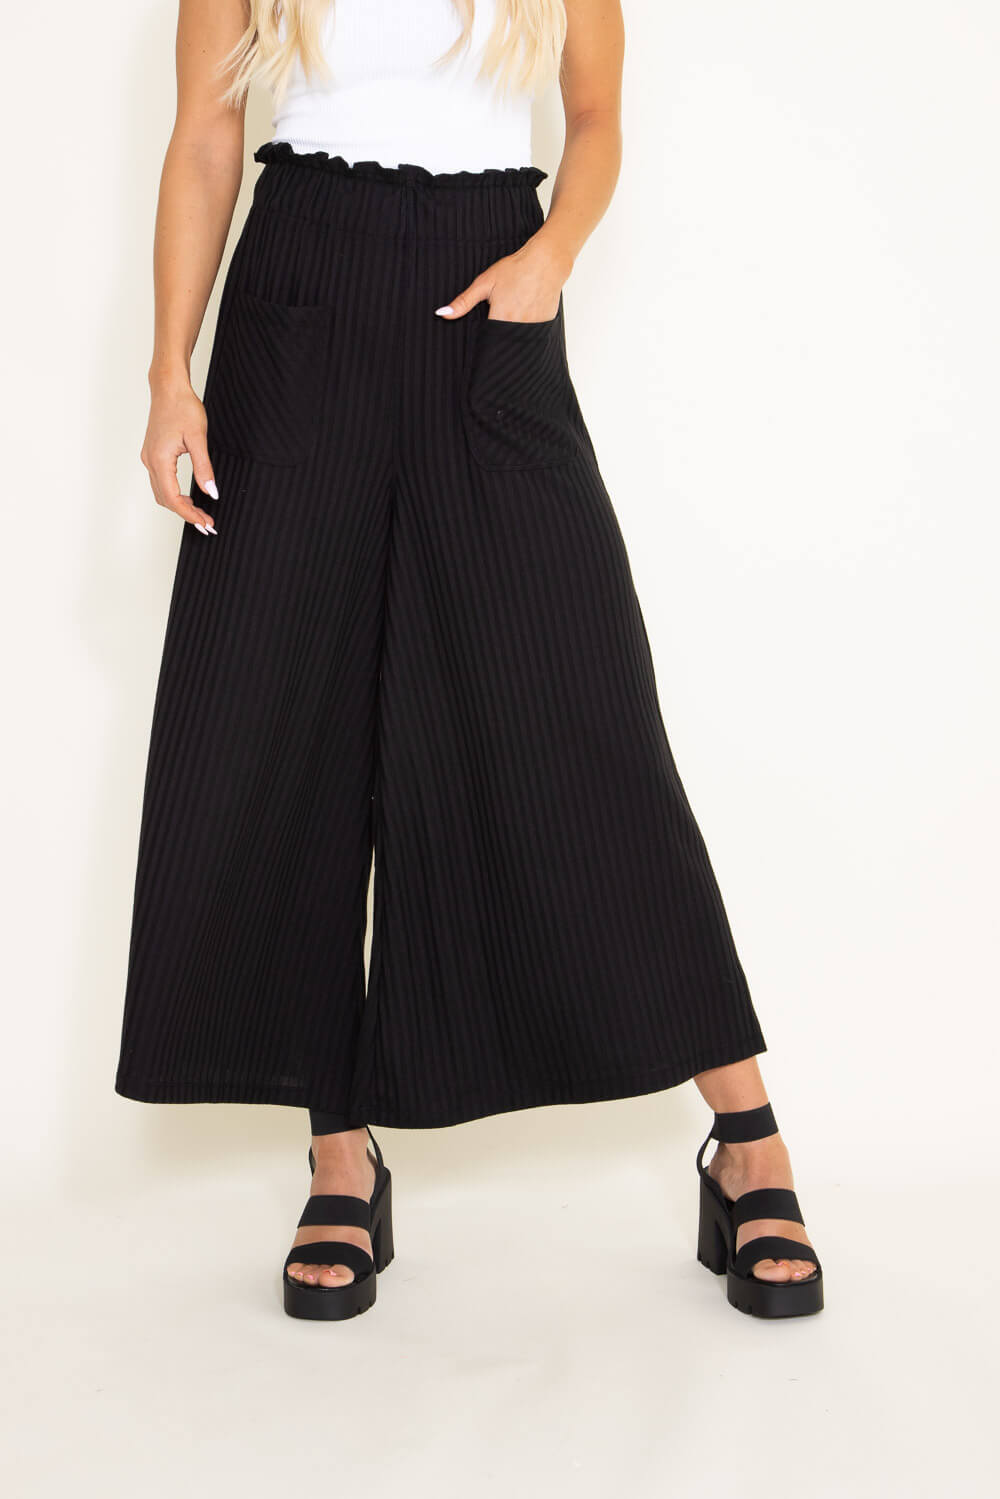 Women's Stretchy High Waisted Wide Leg Button-Down Pants Sailor Bell Flare Pants  Black at Amazon Women's Clothing store